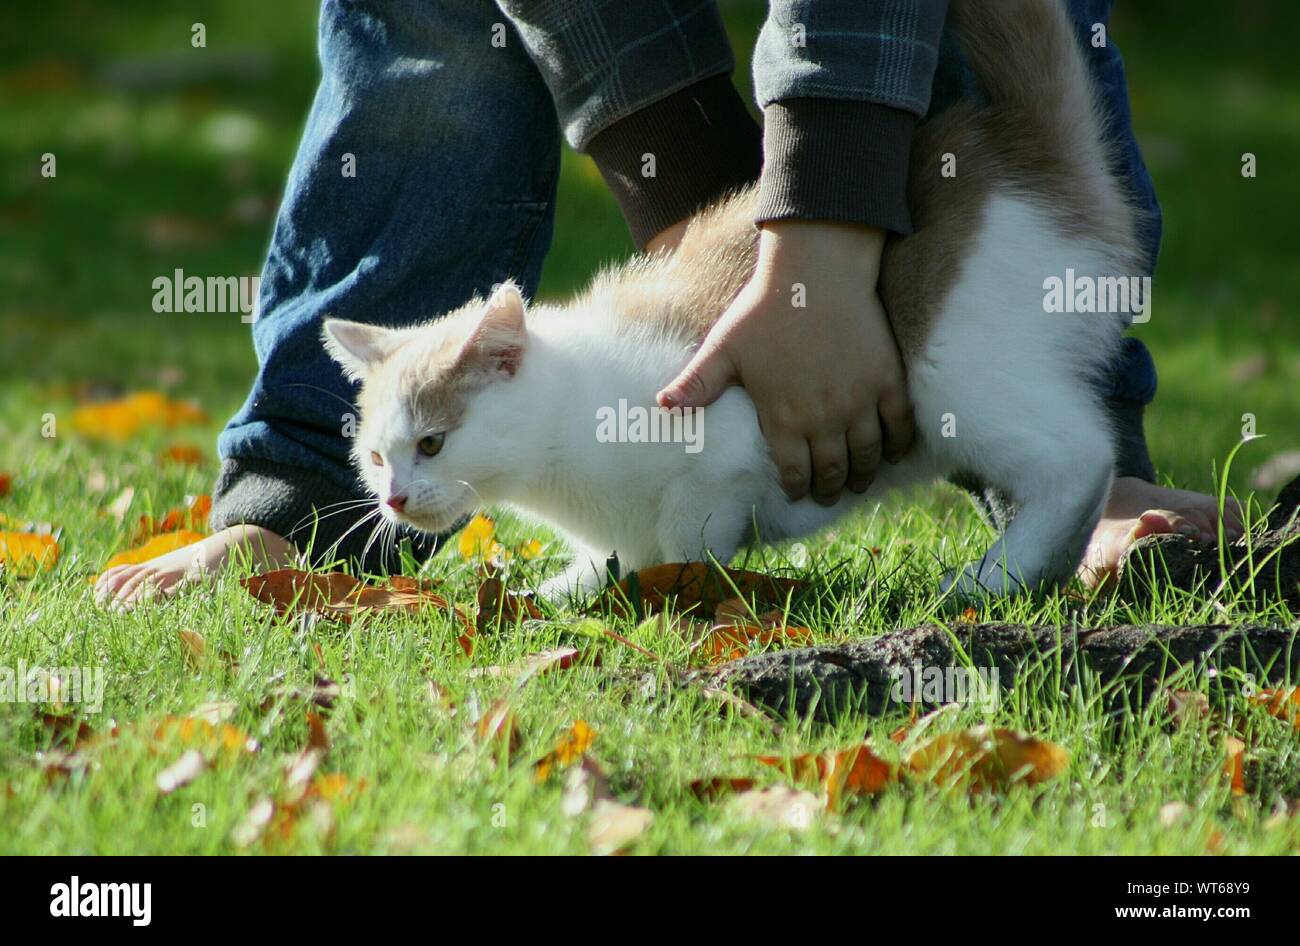 Low Section Of Barefoot Child With Cat Outdoors Stock Photo